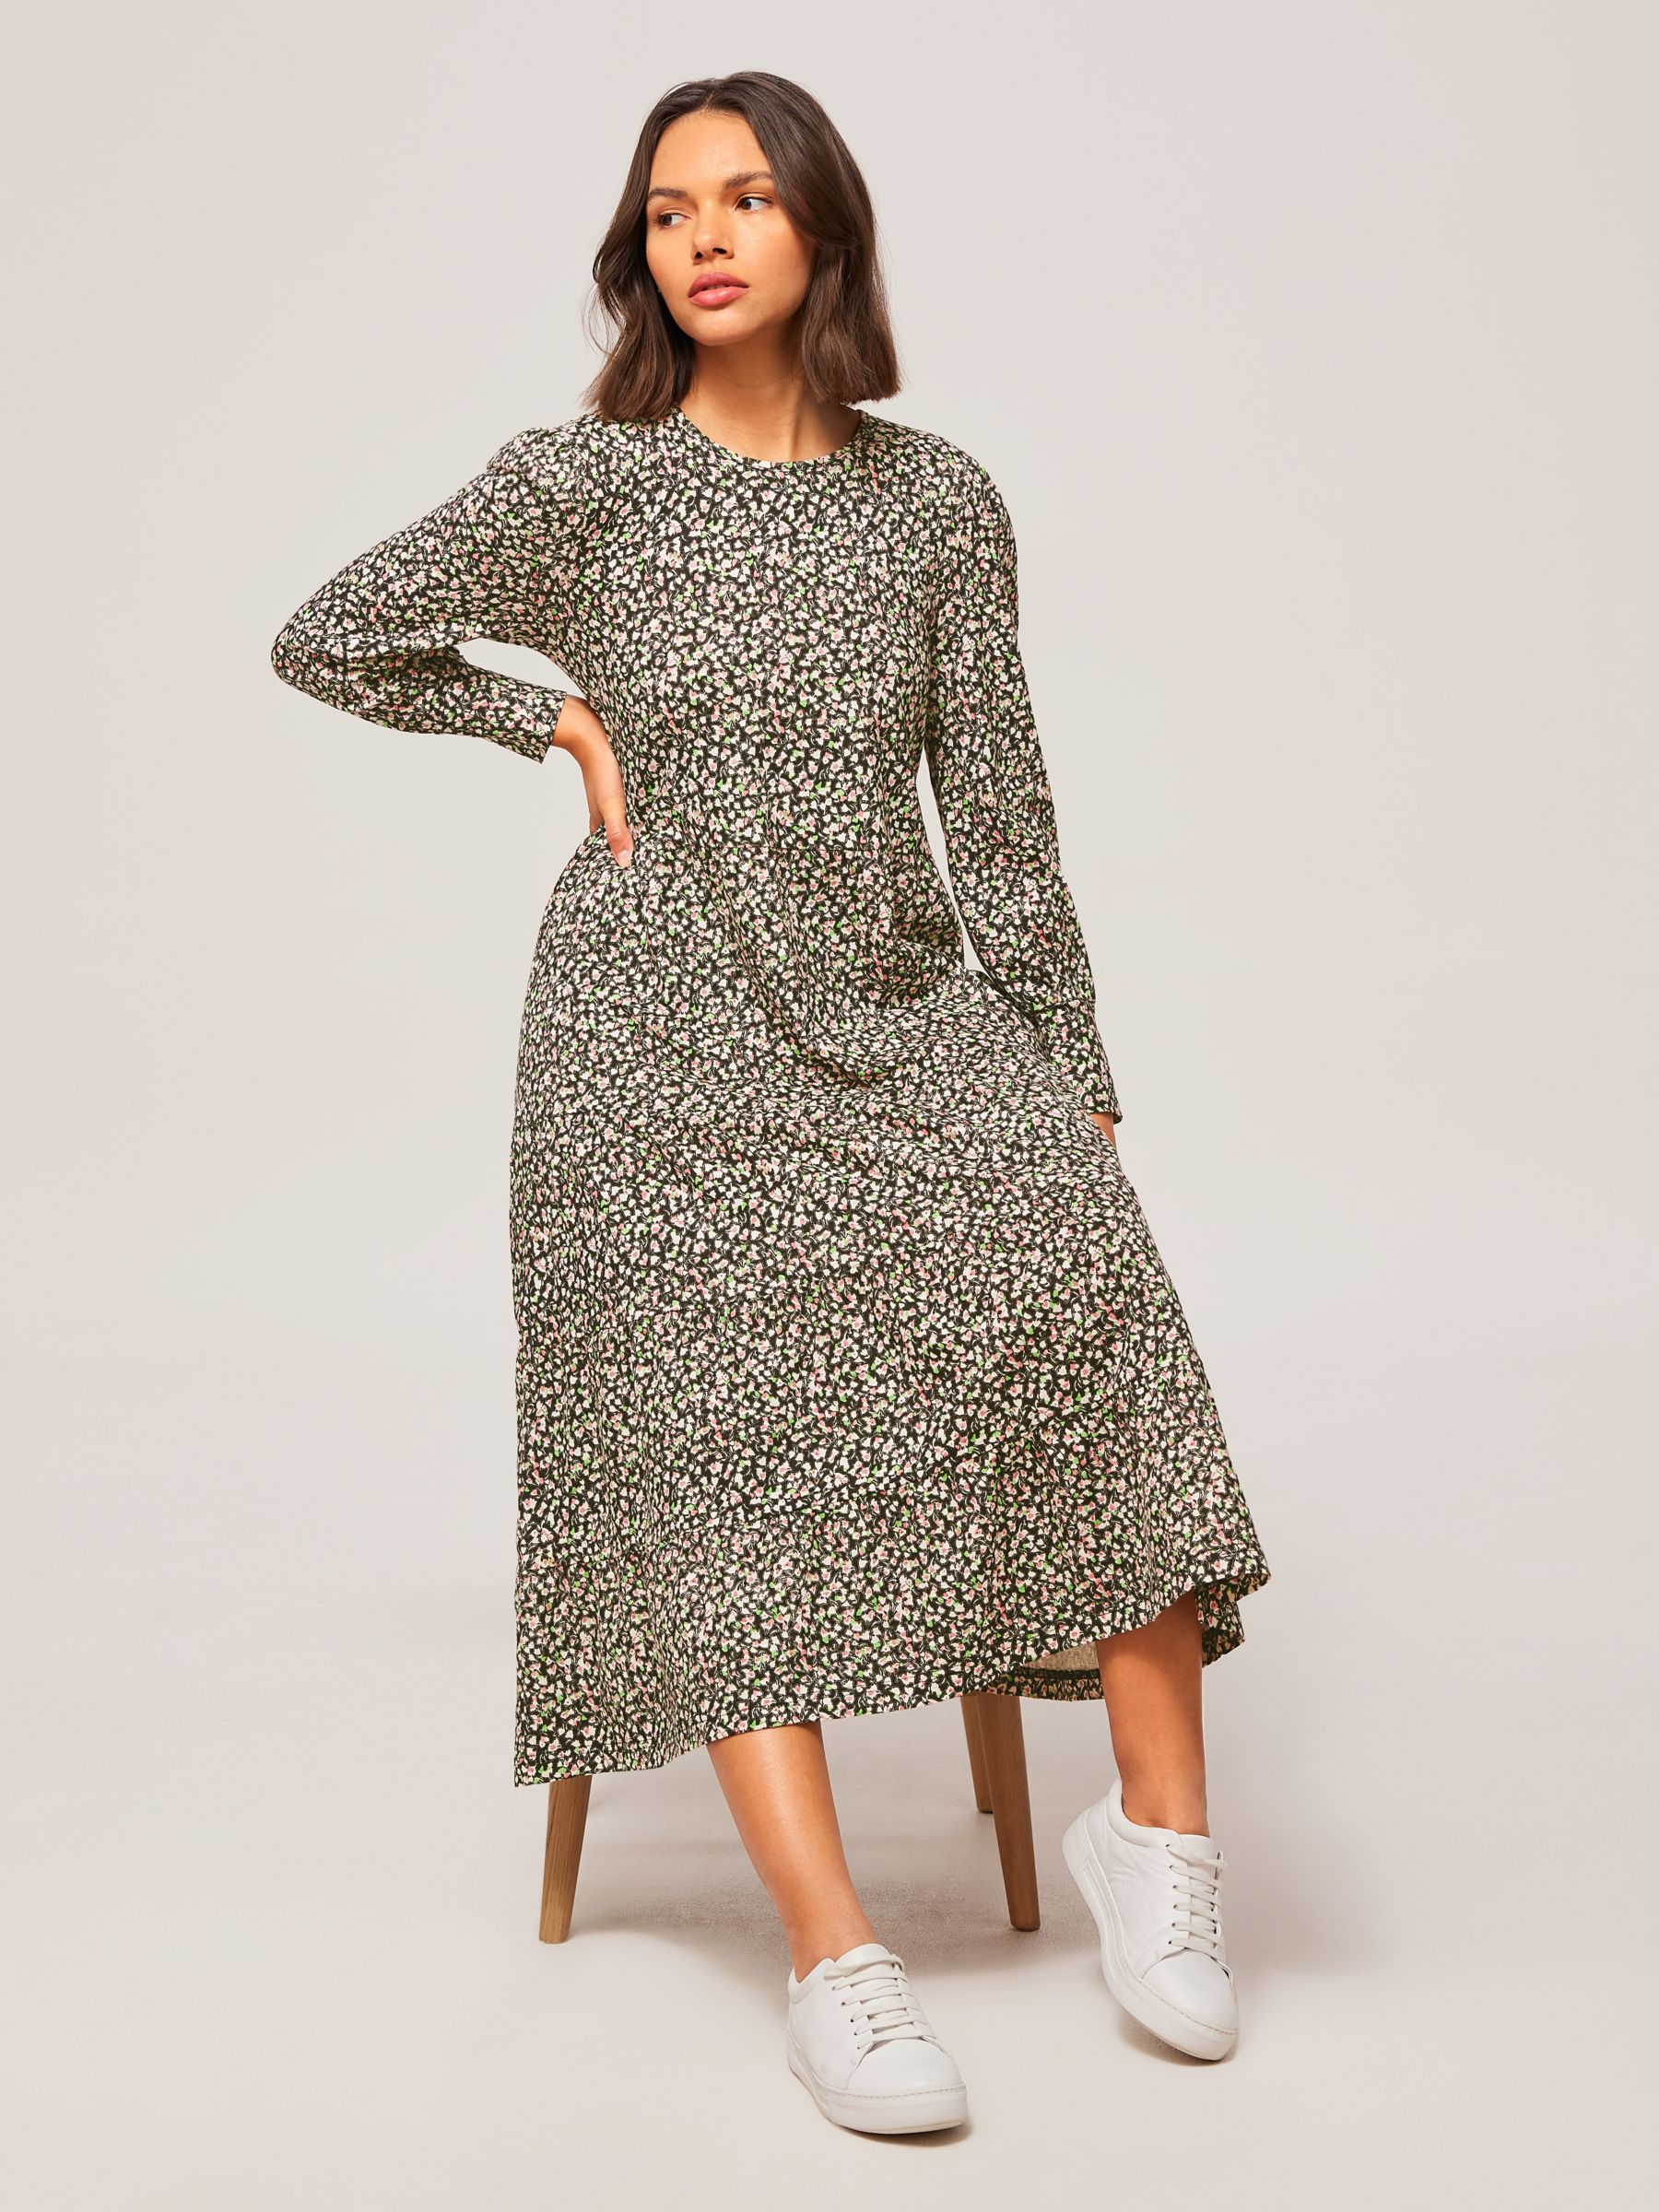 AND/OR Roseanne Floral Jersey Dress, Multi